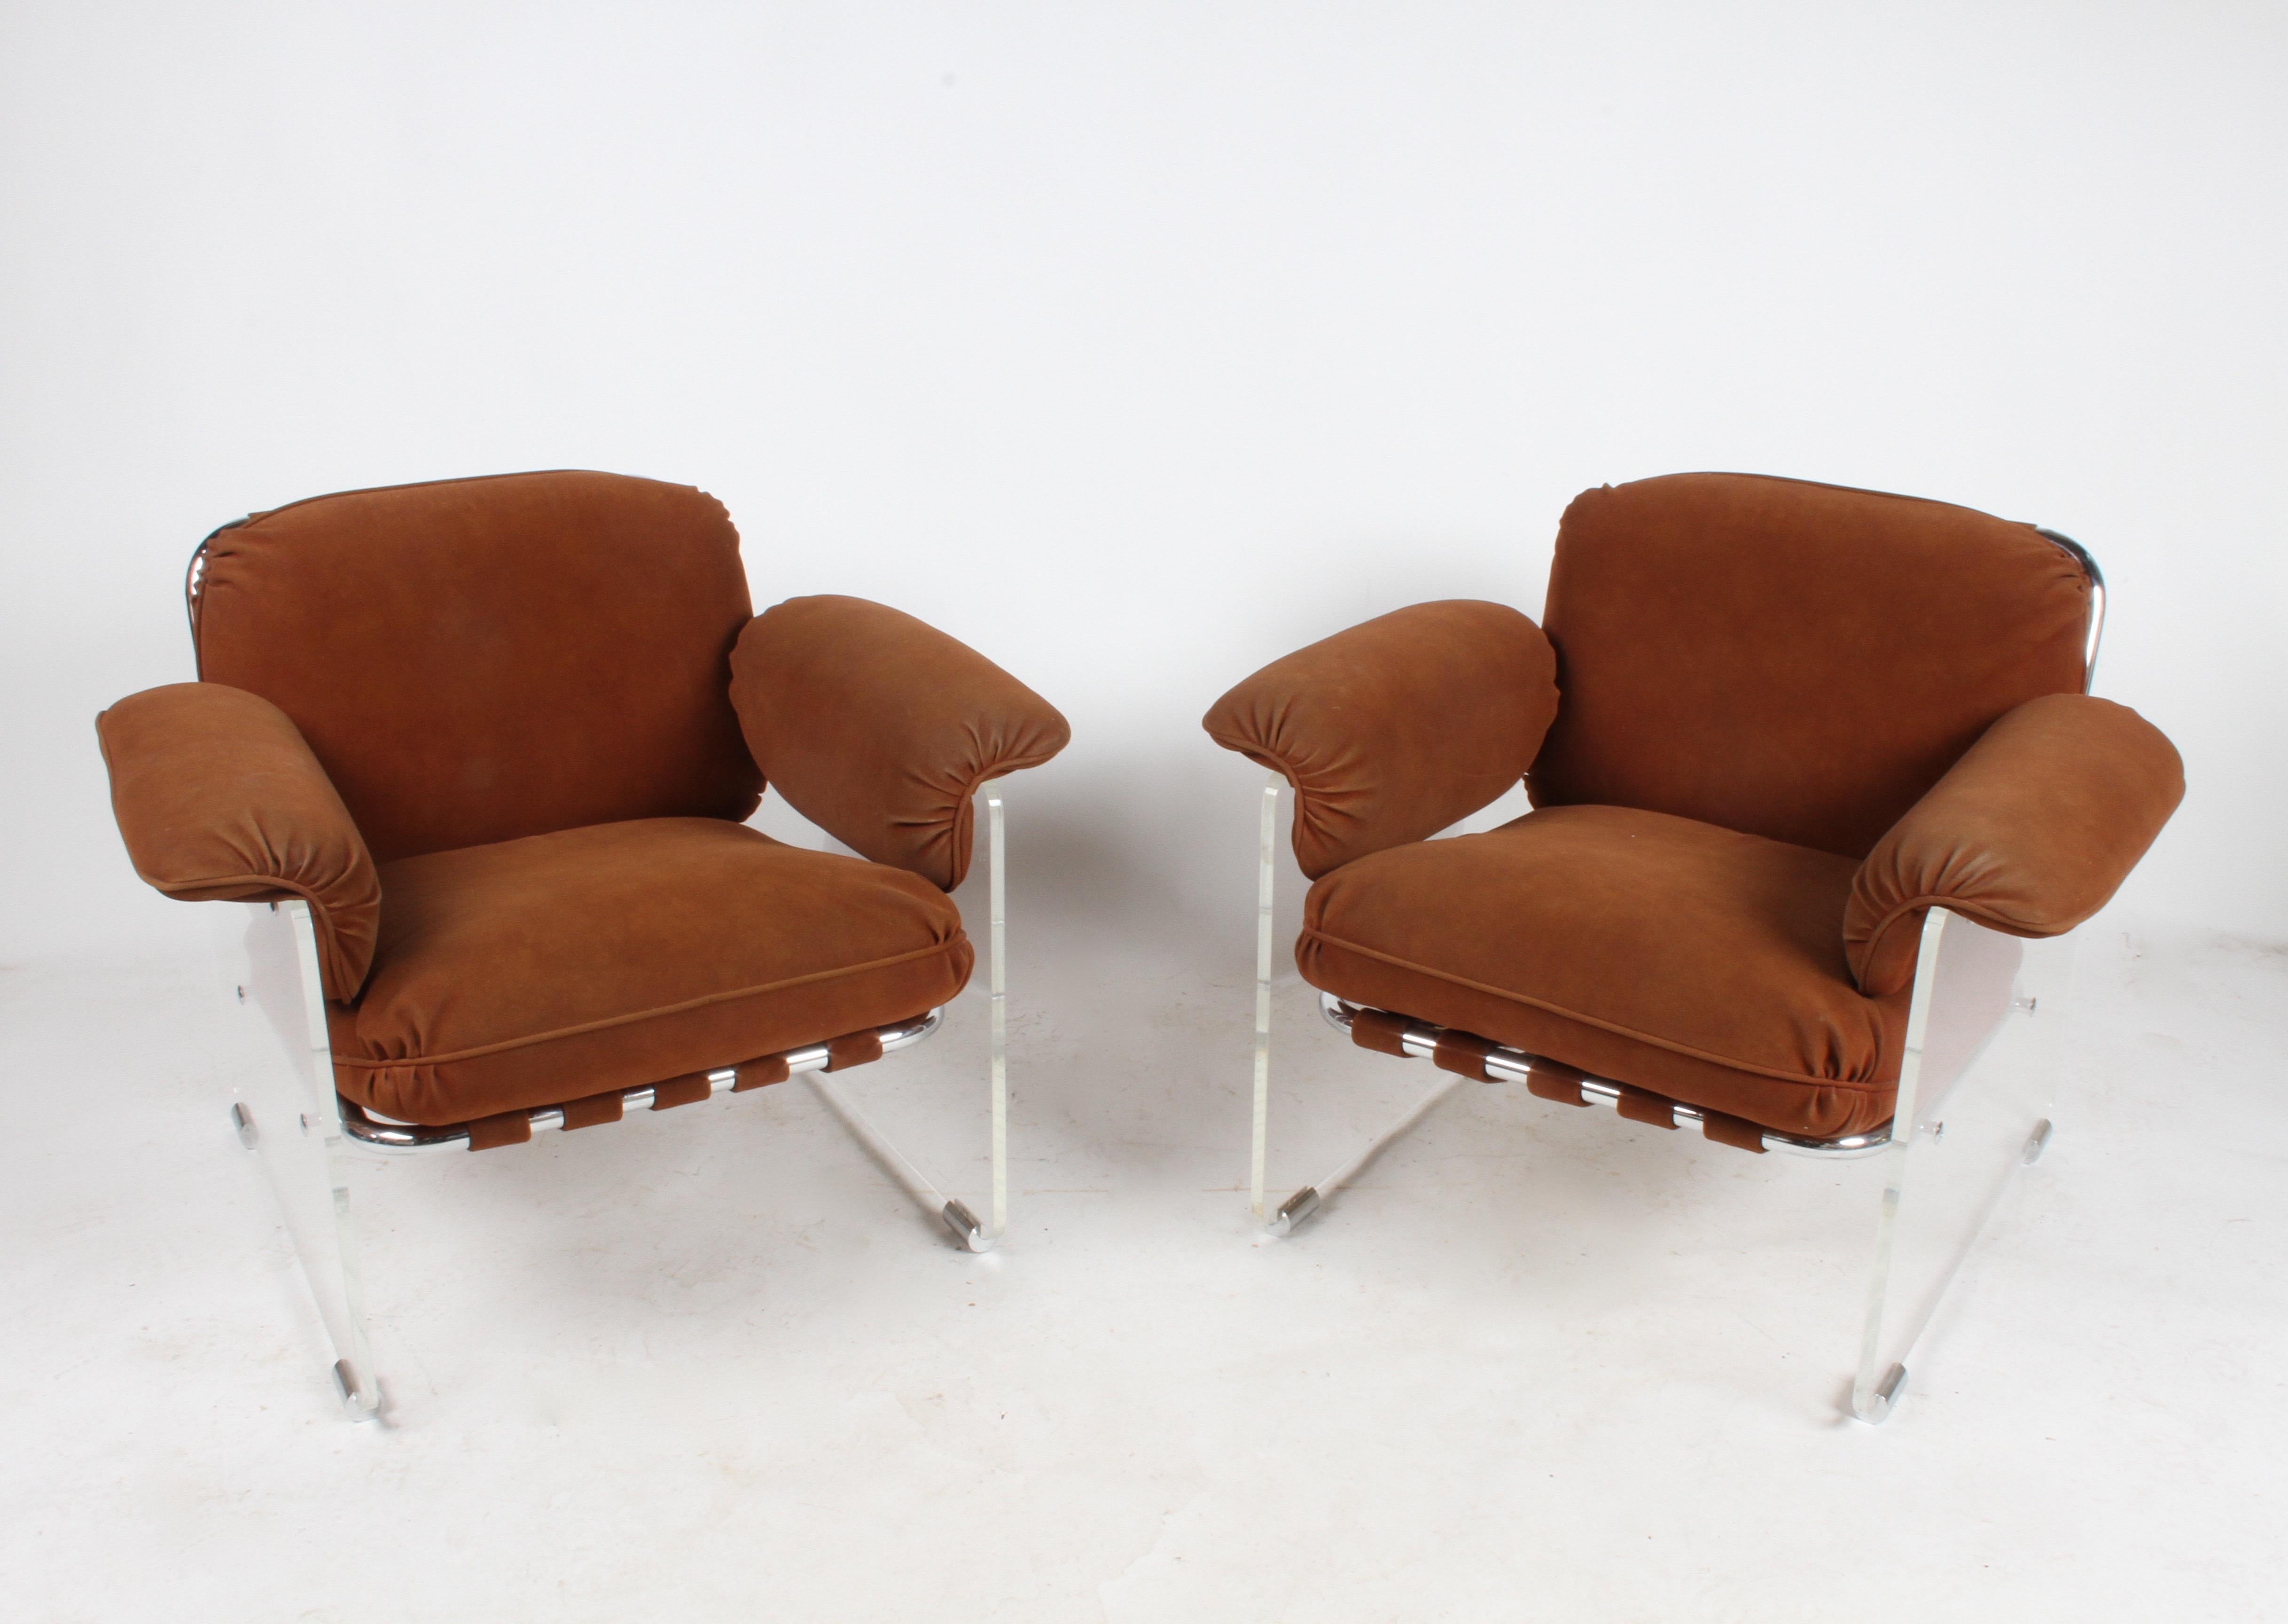 Late 20th Century Pace Collection Argenta Lucite Lounge Chairs, circa 1970s